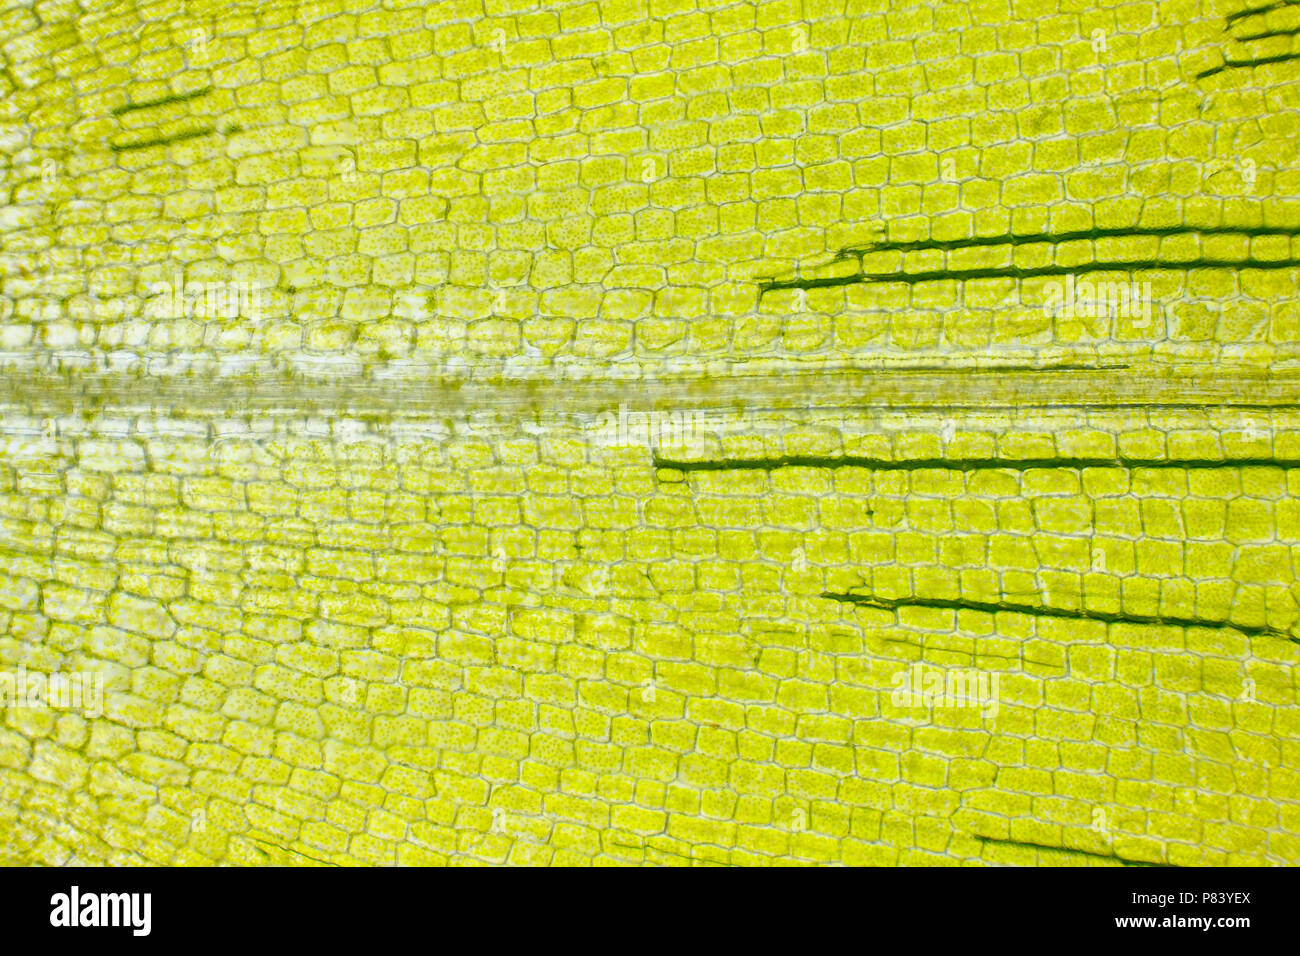 Microscopic view of Canadian waterweed (Elodea canadensis) leaf. Brightfield illumination. Stock Photo